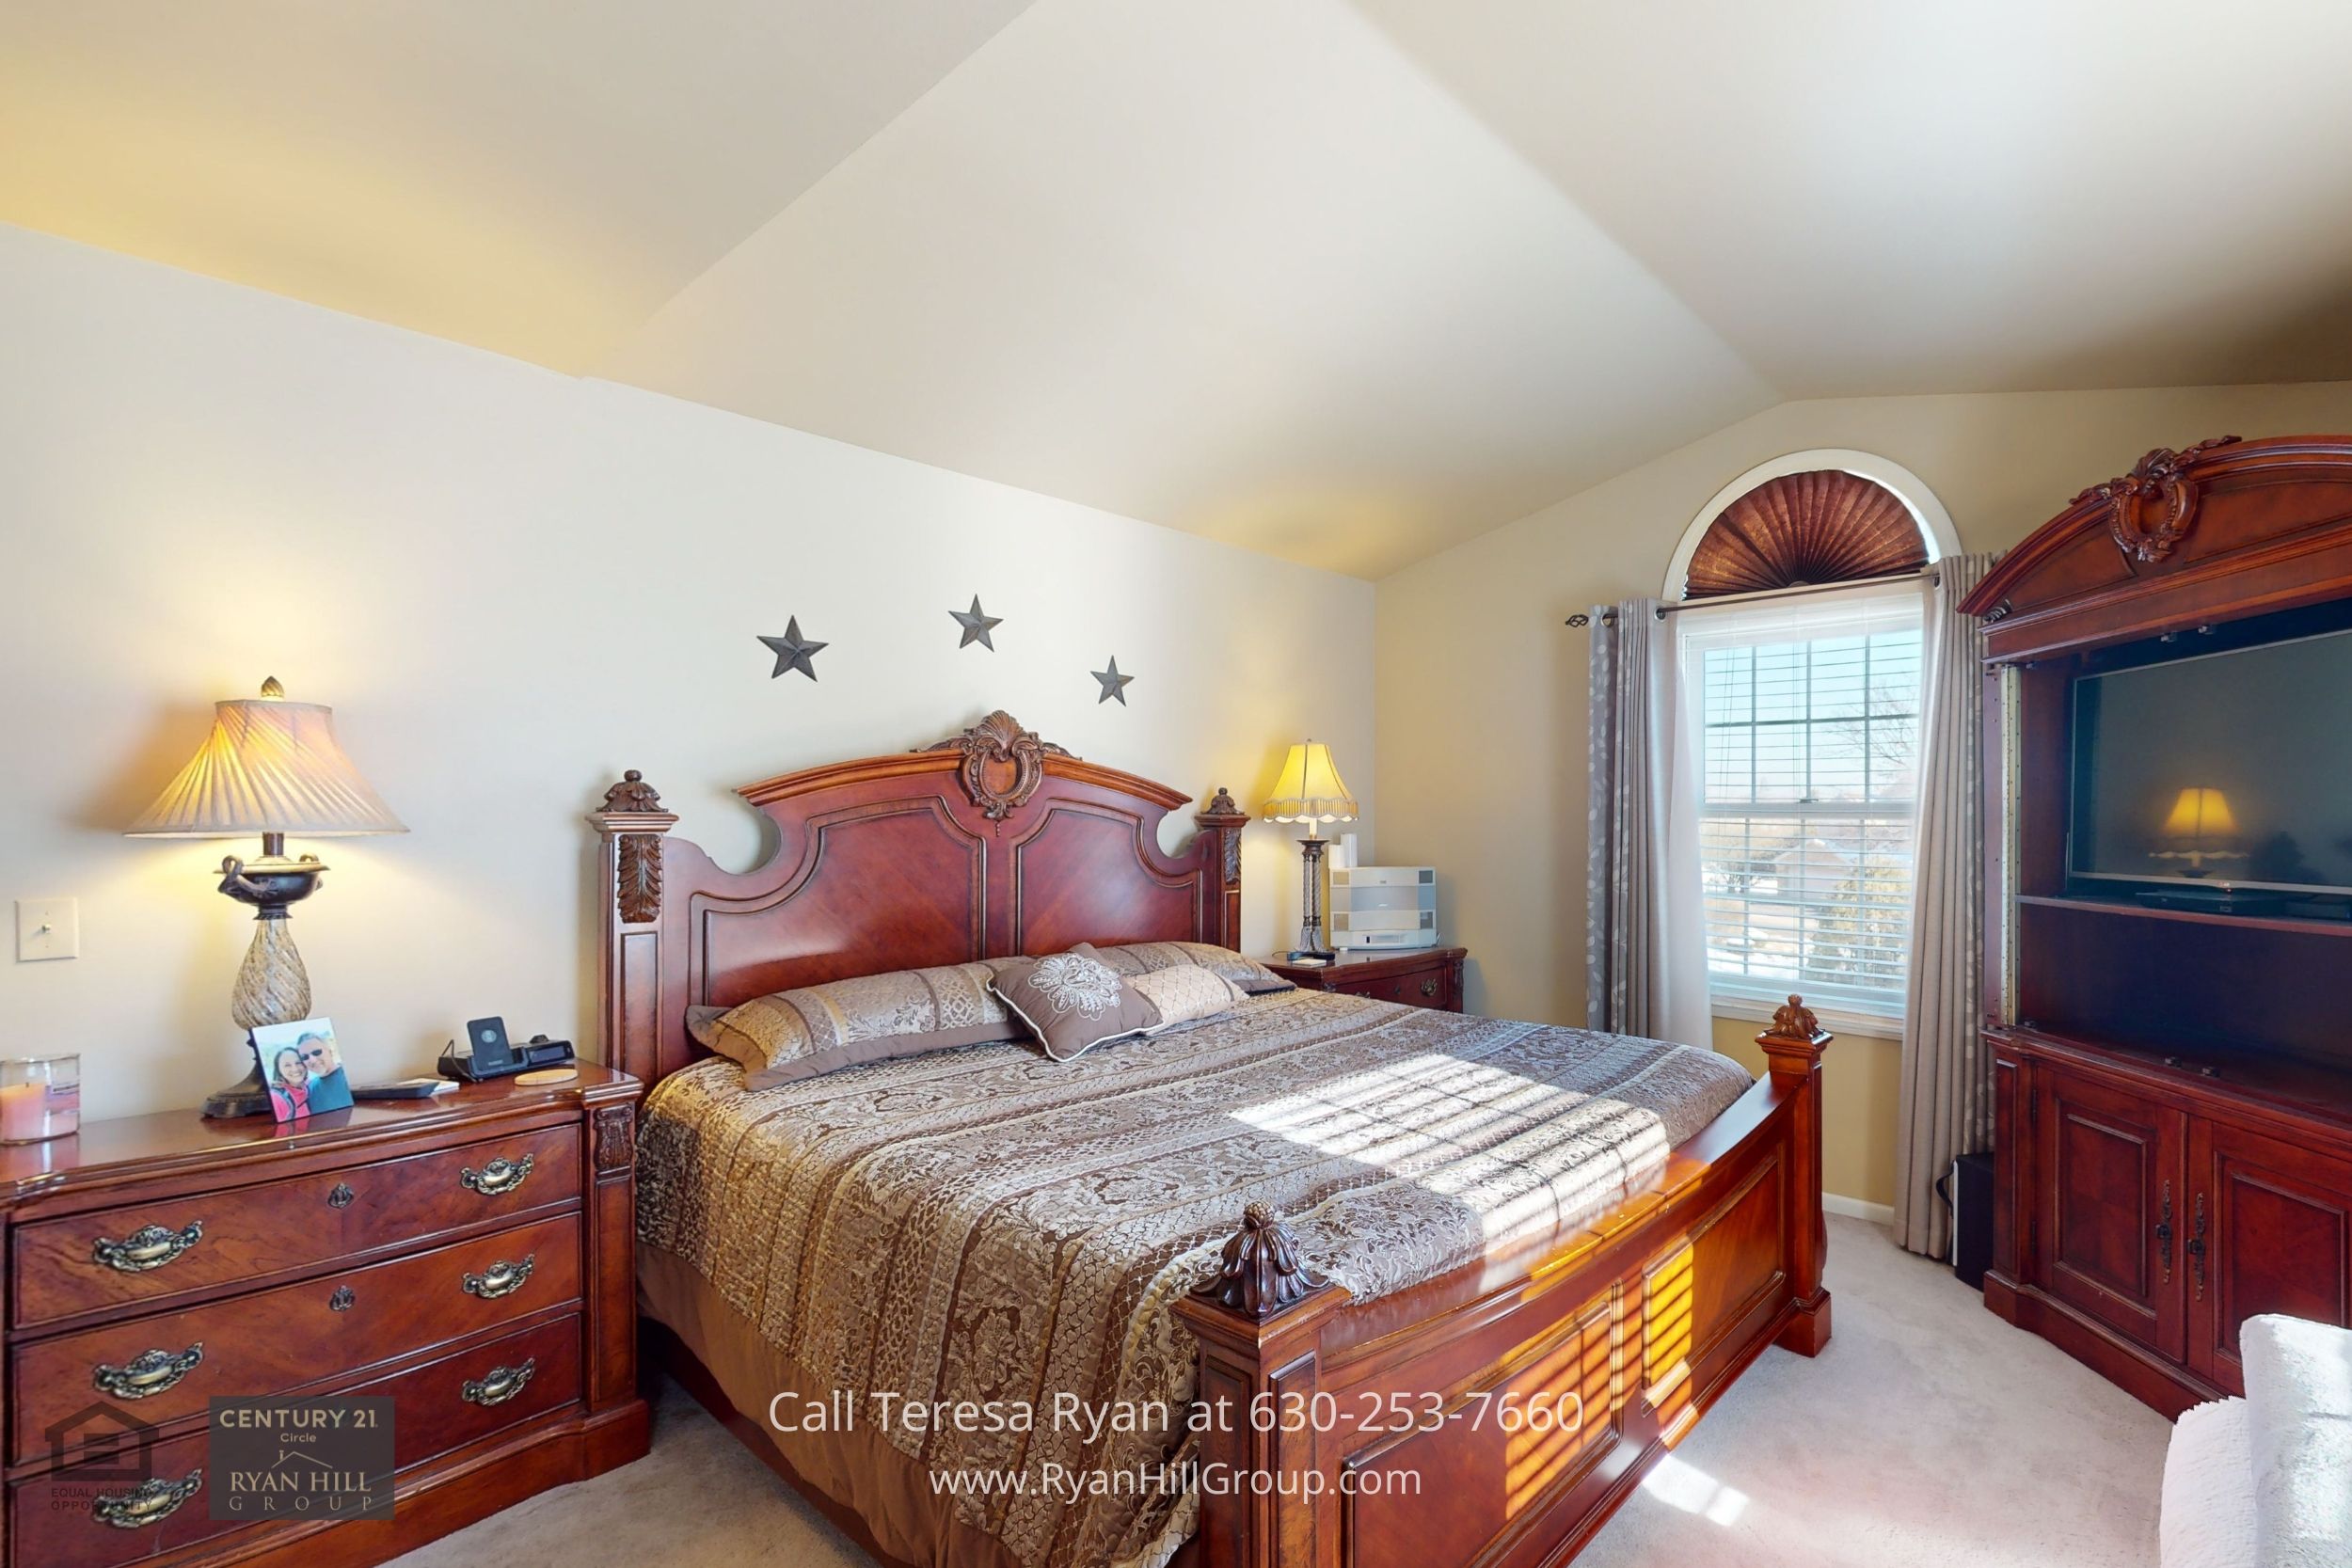 Home for sale in Winfield IL with a spacious primary bedroom complete with soft carpeting and large walk-in closets.